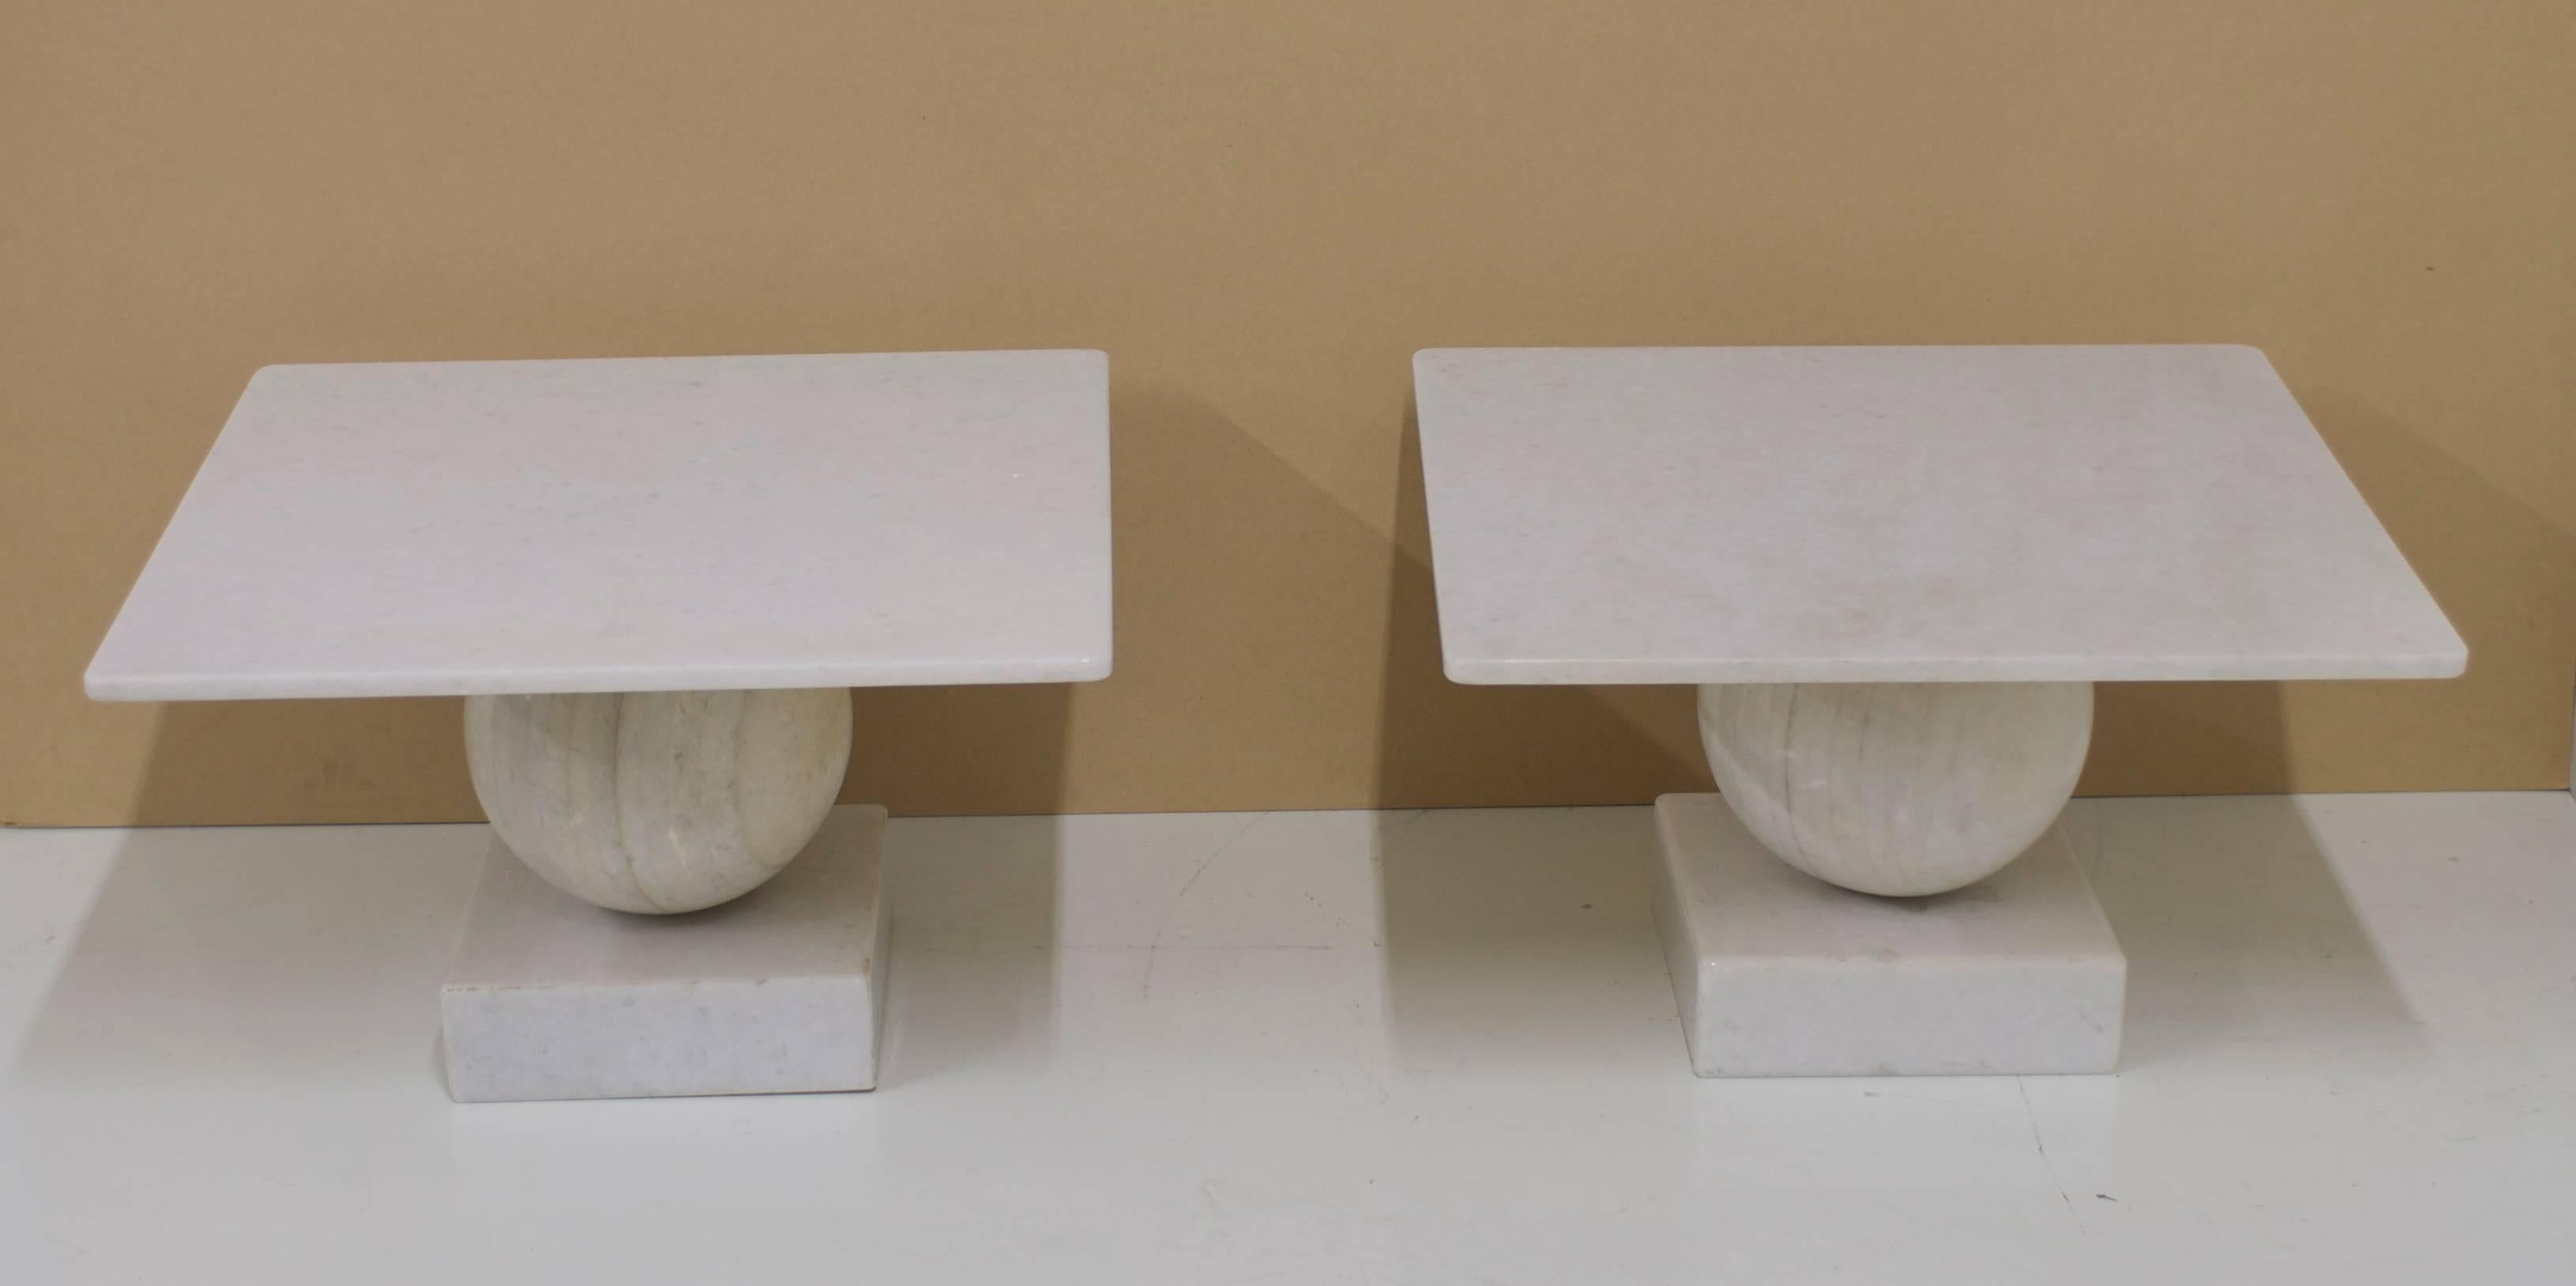 A pair of custom solid marble side tables made of geometric forms. A solid marble ball rests on a square base. The 30